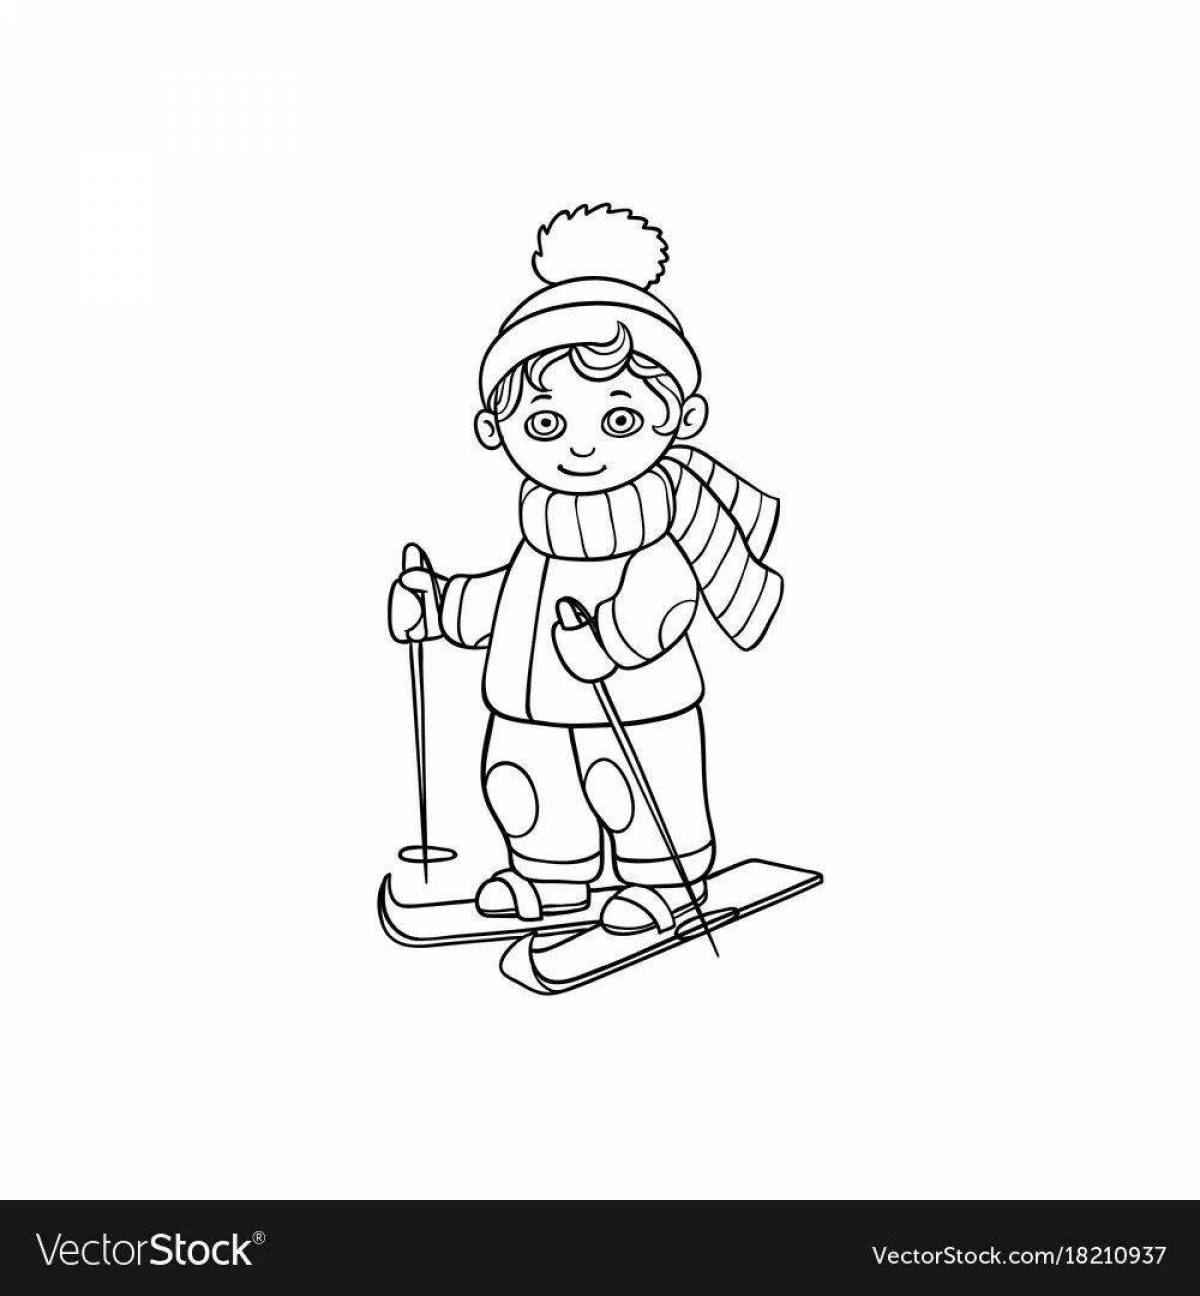 Exciting ski coloring